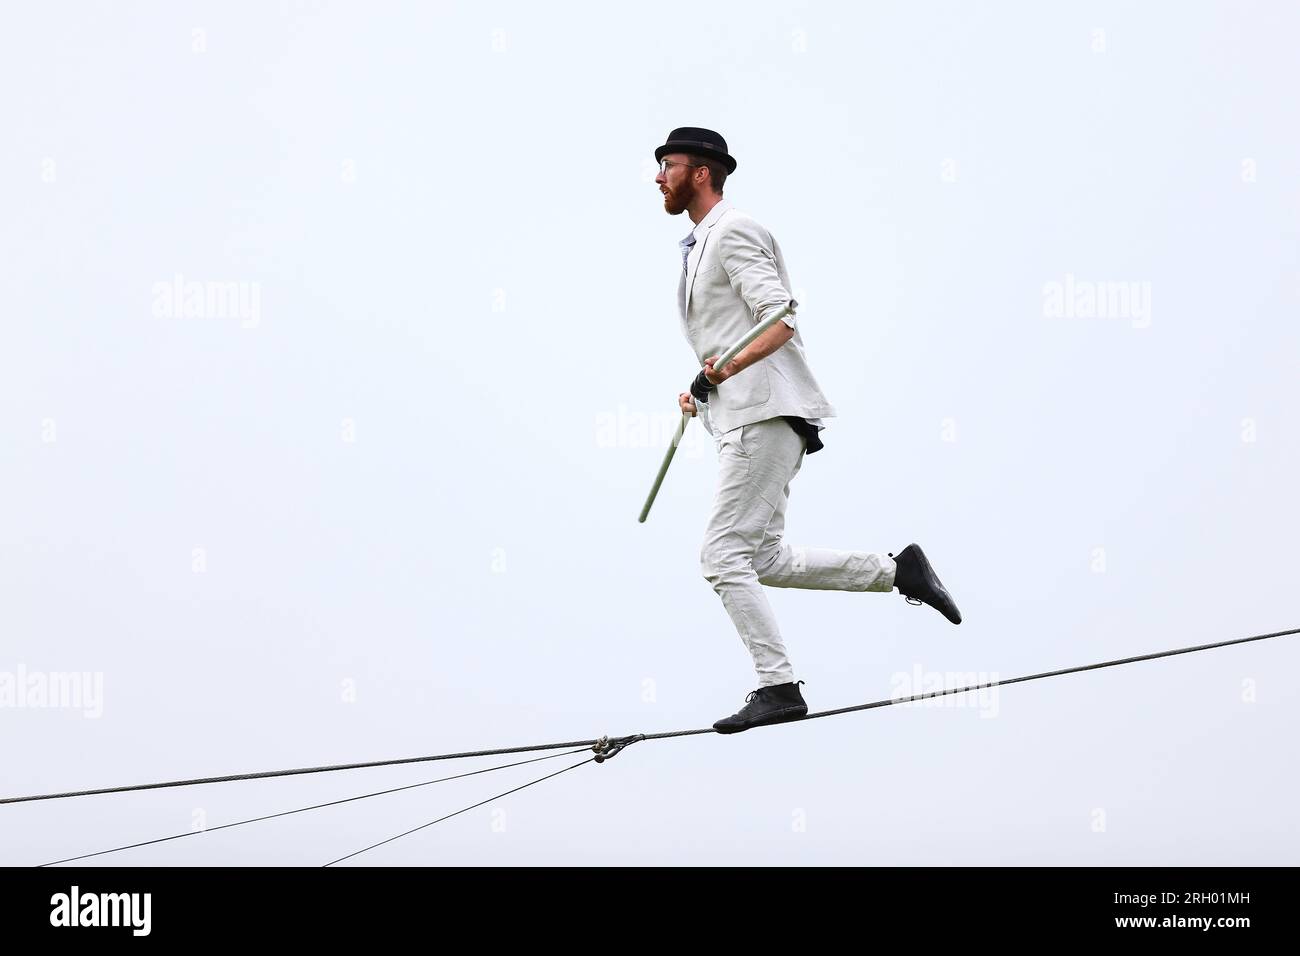 https://c8.alamy.com/comp/2RH01MH/carmarthen-uk-12-august-2023-carmarthen-born-high-wire-walker-ellis-grover-walks-the-length-of-the-rugby-pitch-100m-in-carmarthen-park-at-a-height-of-10m-without-a-safety-rope-or-net-ellis-started-honing-his-skills-as-a-teenager-at-carmarthen-park-where-he-would-balance-along-the-railings-that-surround-the-parks-velodrome-credit-gruffydd-thomasalamy-2RH01MH.jpg